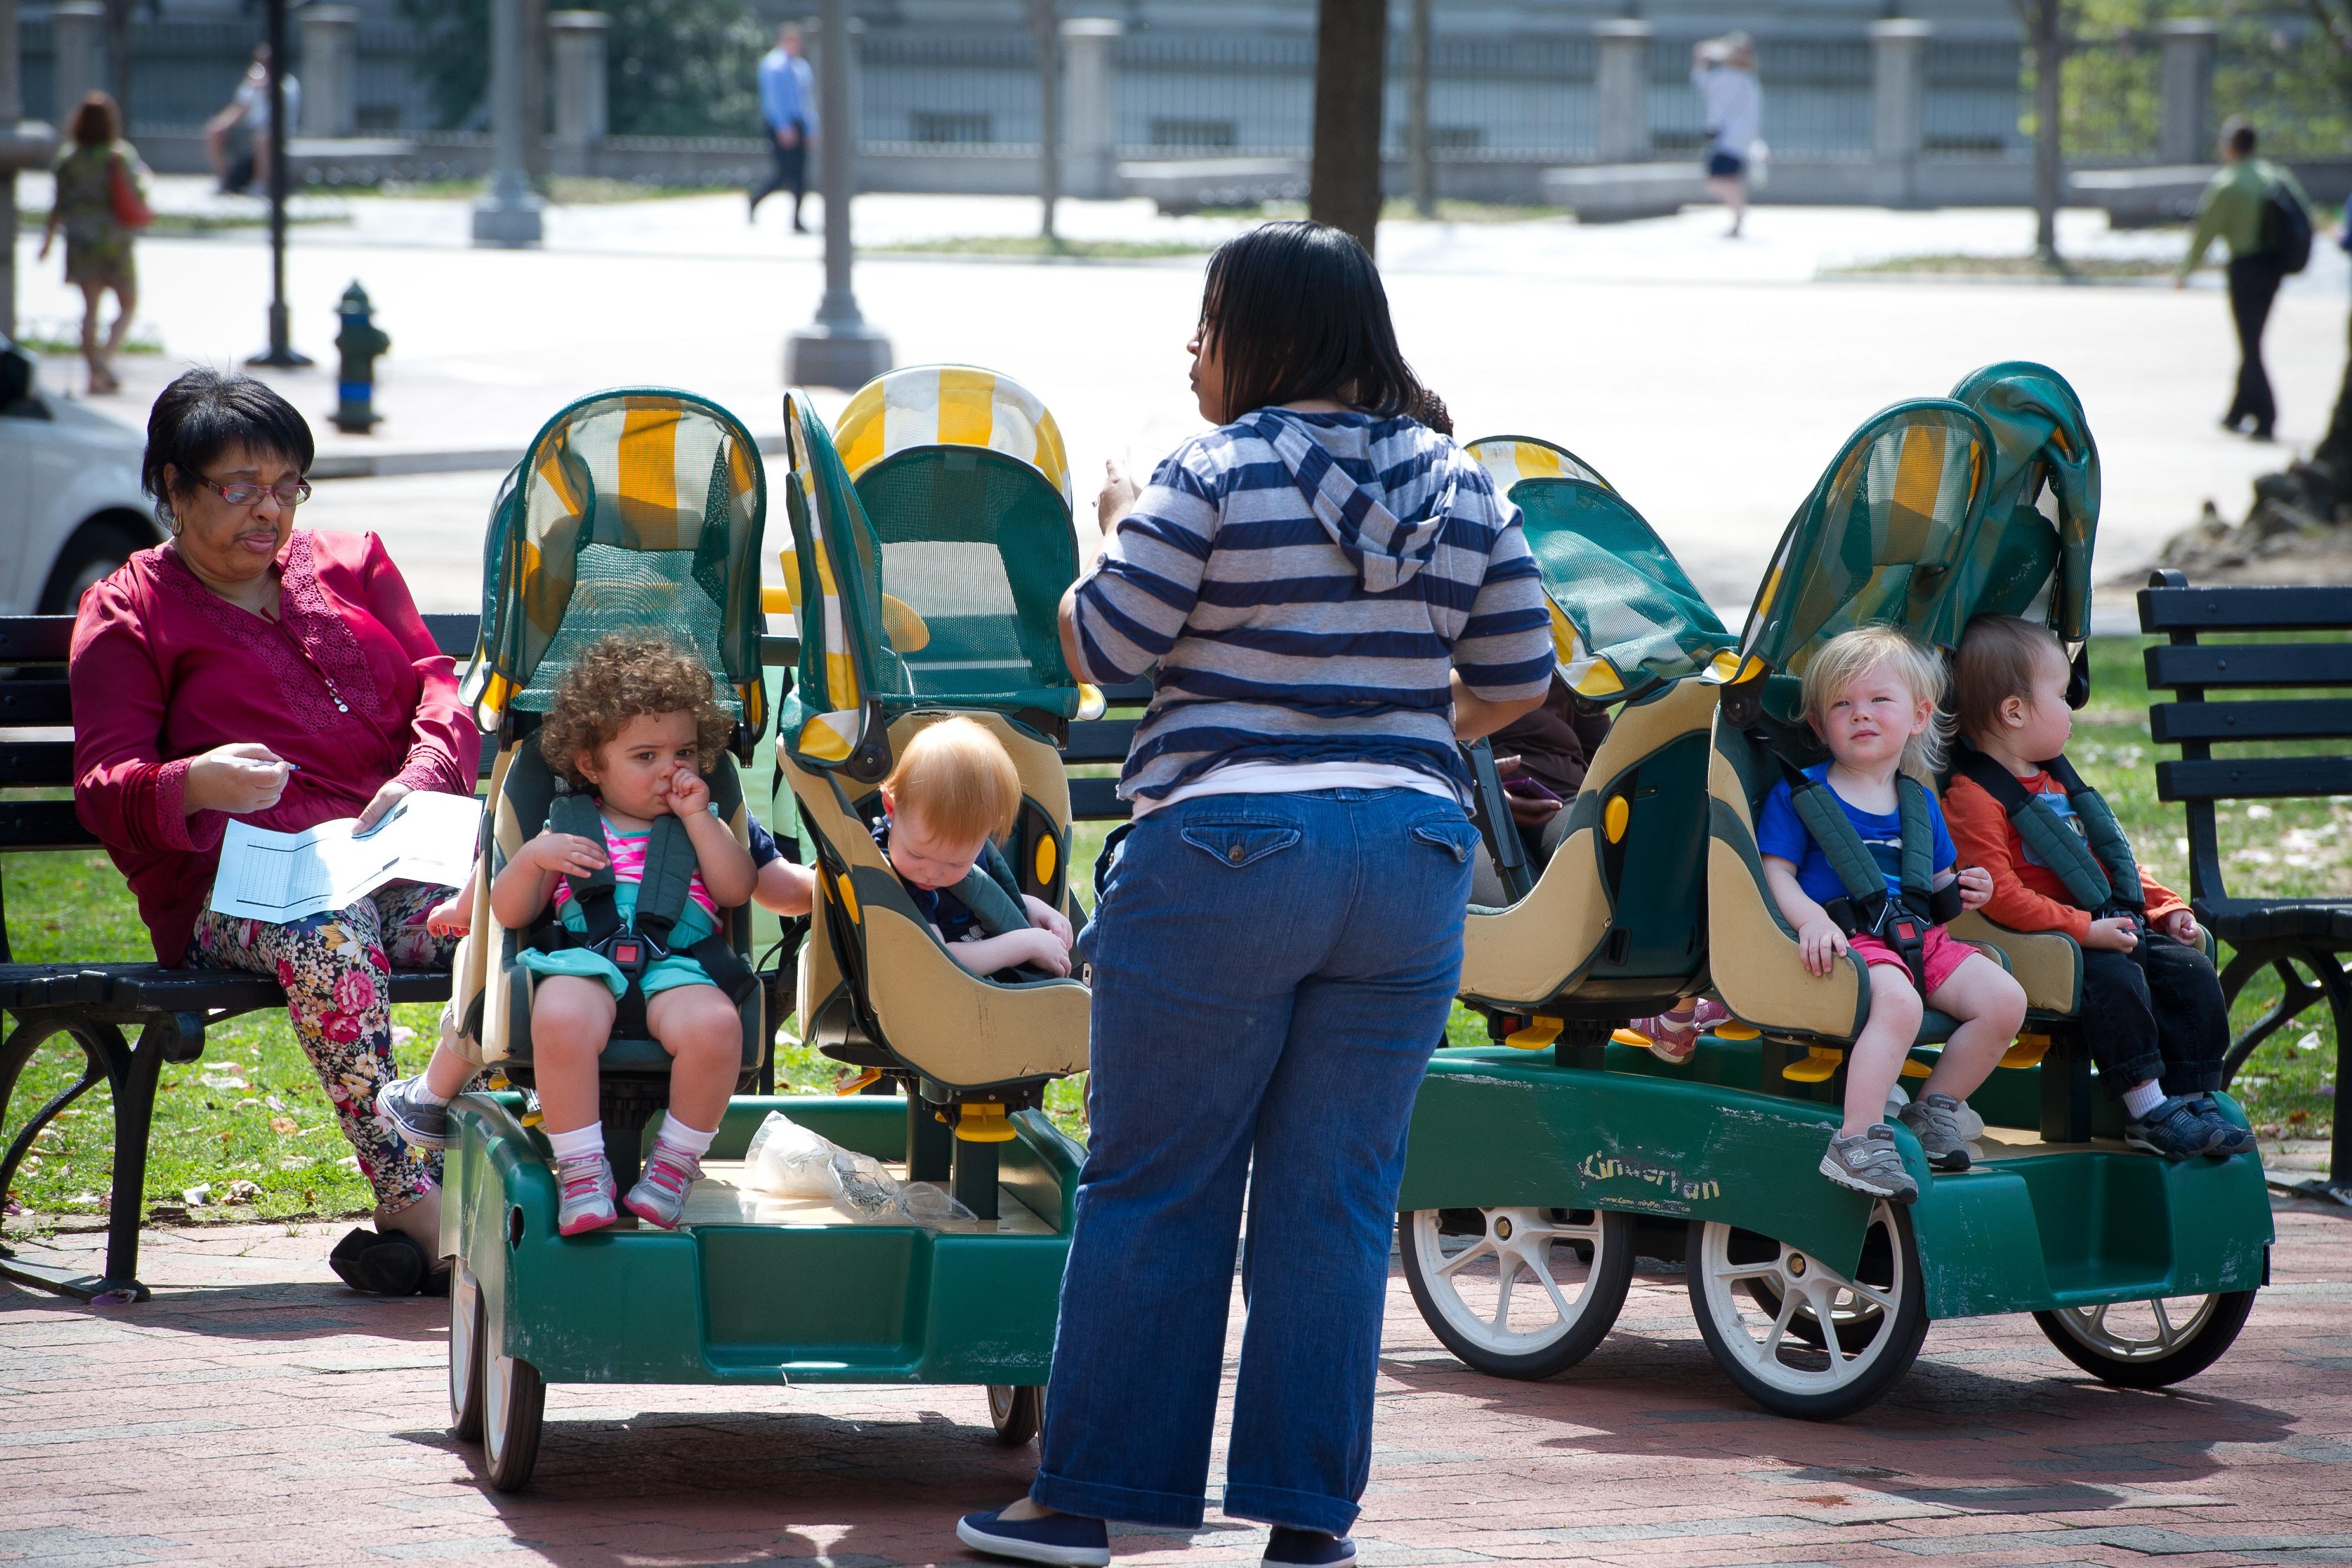 A daycare employee watches children in carts at a park in downtown Washington, DC on April 11, 2013. Delayed by unseasonably cold weather, Washington, D.C.'s cherry blossoms finally are in bloom. AFP PHOTO / MLADEN ANTONOV        (Photo credit should read MLADEN ANTONOV/AFP via Getty Images)